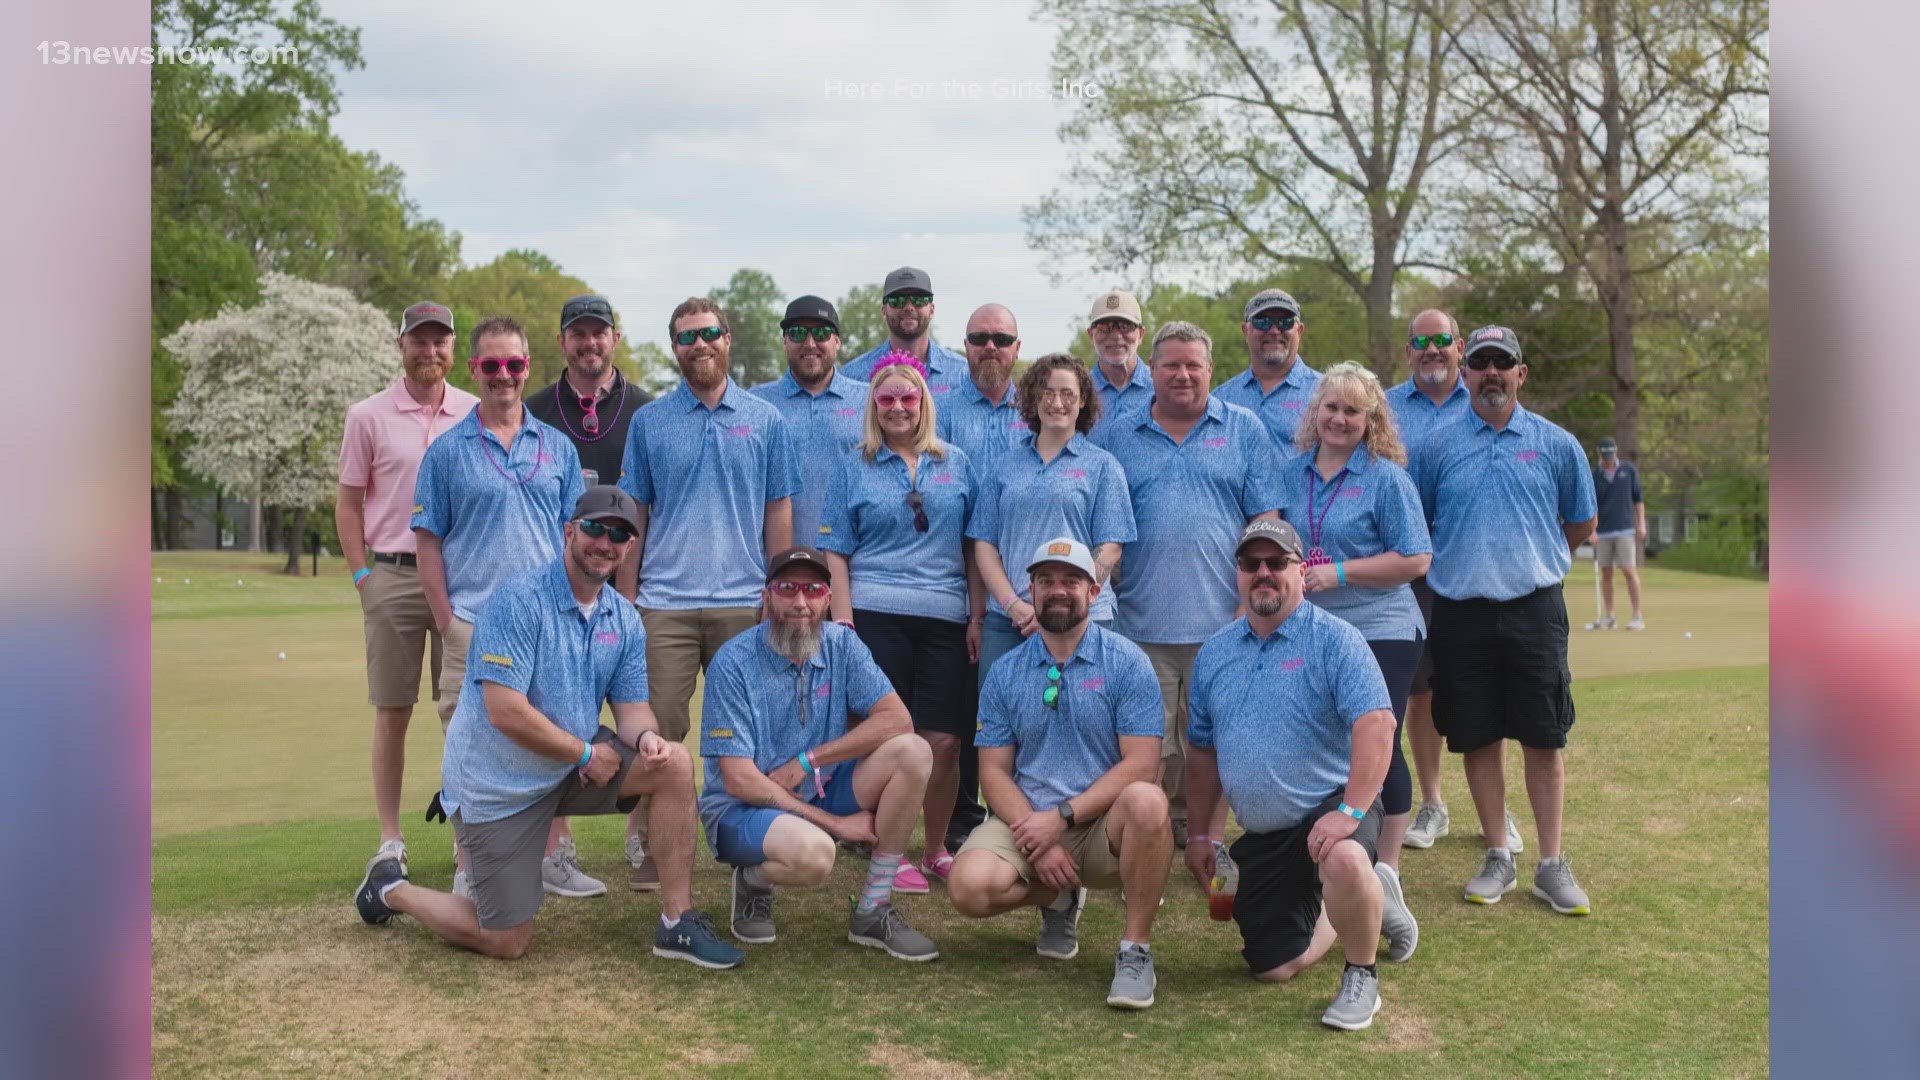 The golfing tournament raises money to support young women living with breast cancer.